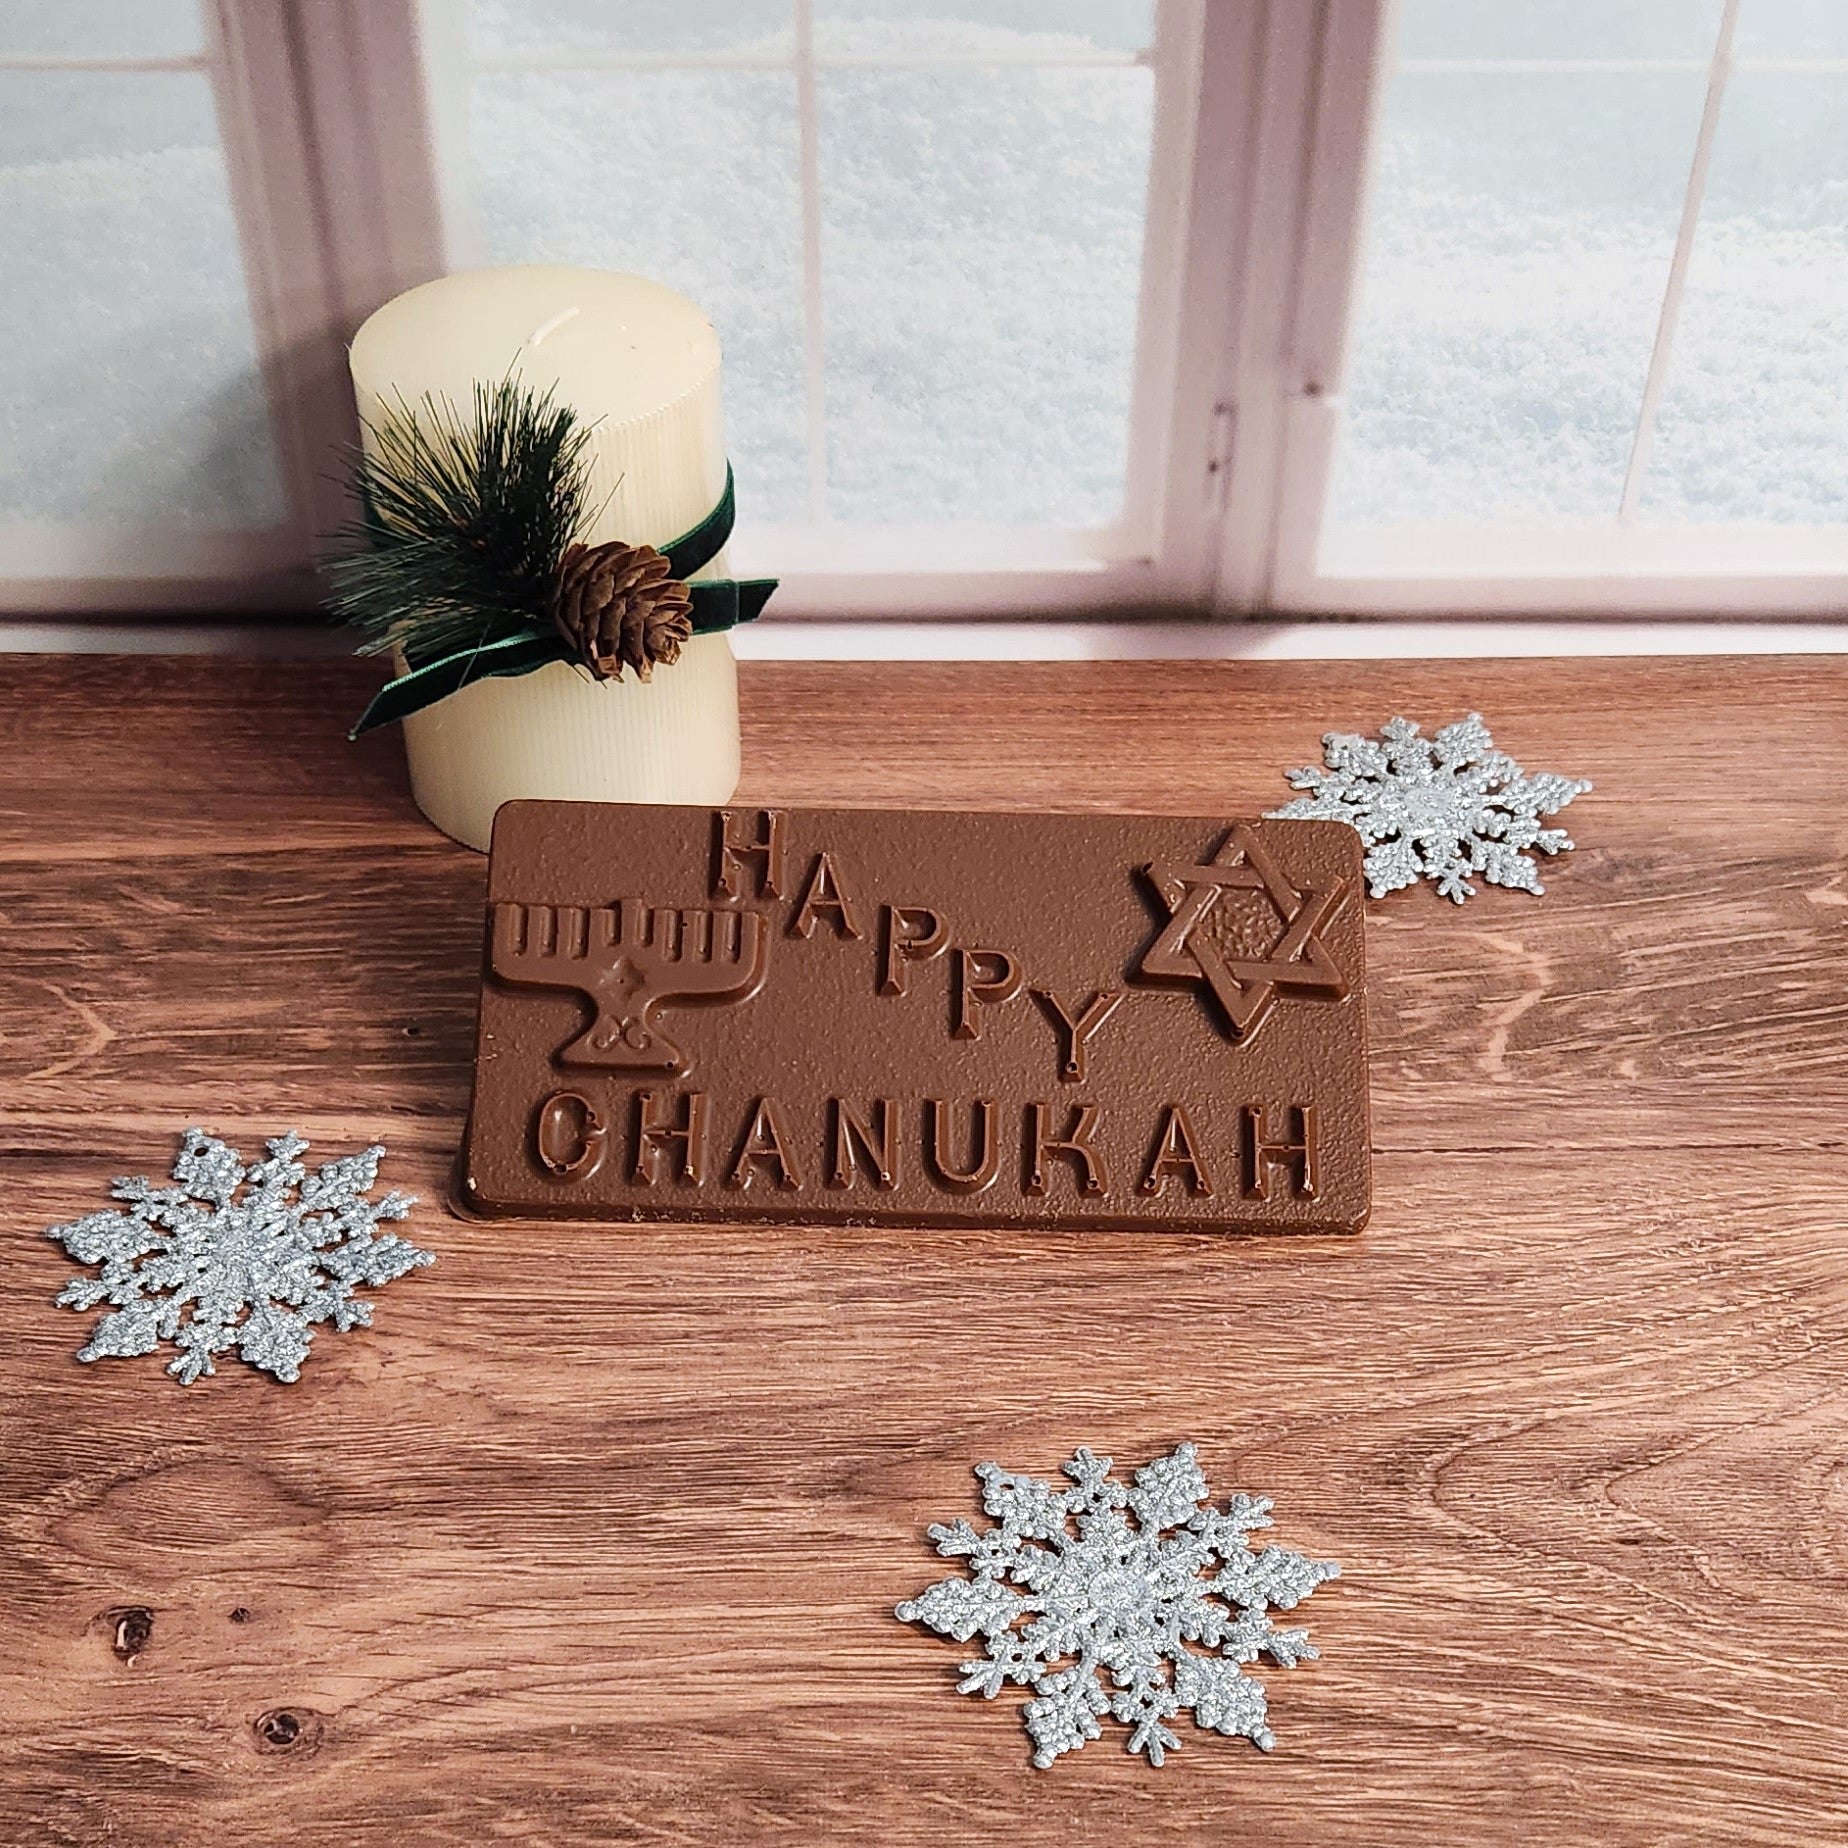 Celebrate Chanukah with our Delicious Chocolate Greeting Card! Made with creamy milk chocolate, this festive treat is the ideal gift for friends and family to enjoy. 